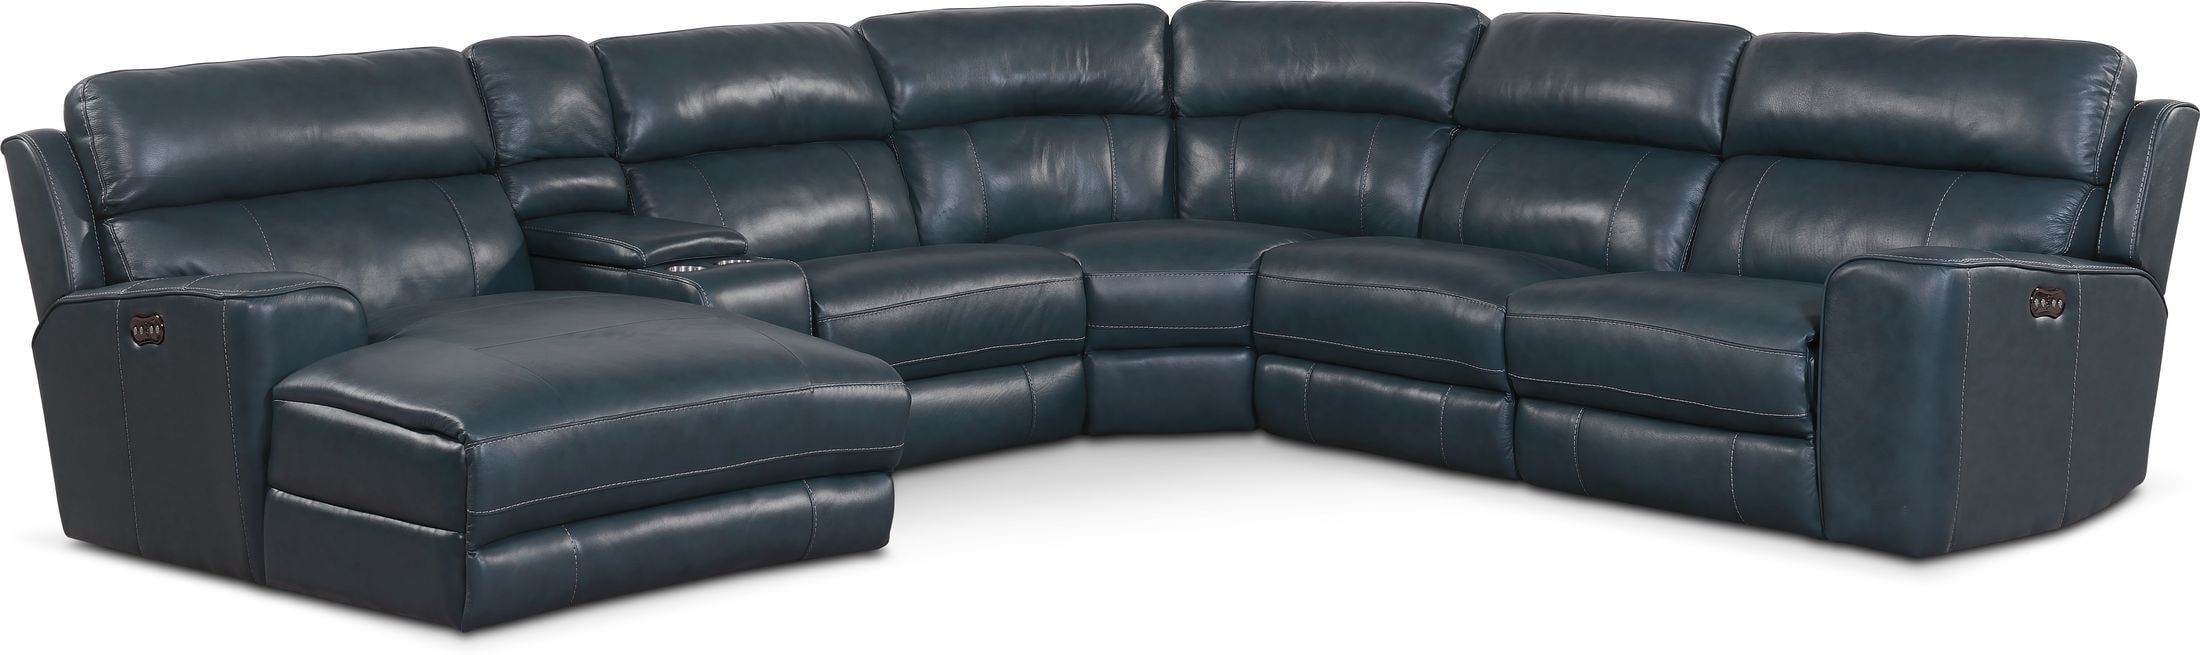 Newport 6 Piece Dual Power Reclining Sectional With Chaise Within Forte Gray Power Reclining Sofas (View 4 of 15)